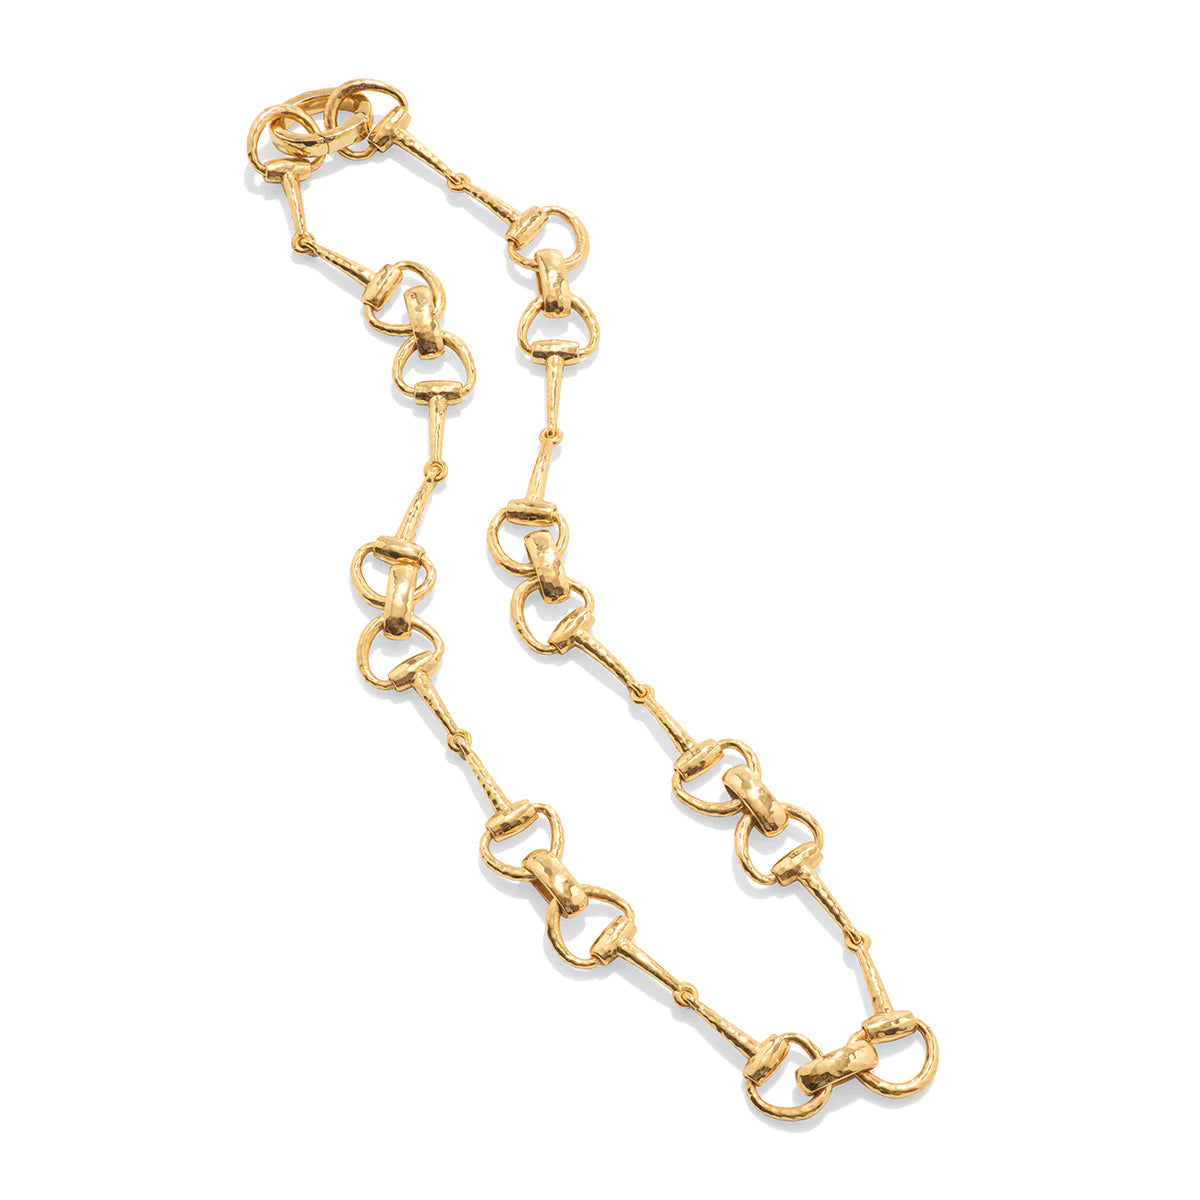 Equestrian Snaffle Bit 20" Chain Necklace - Gold